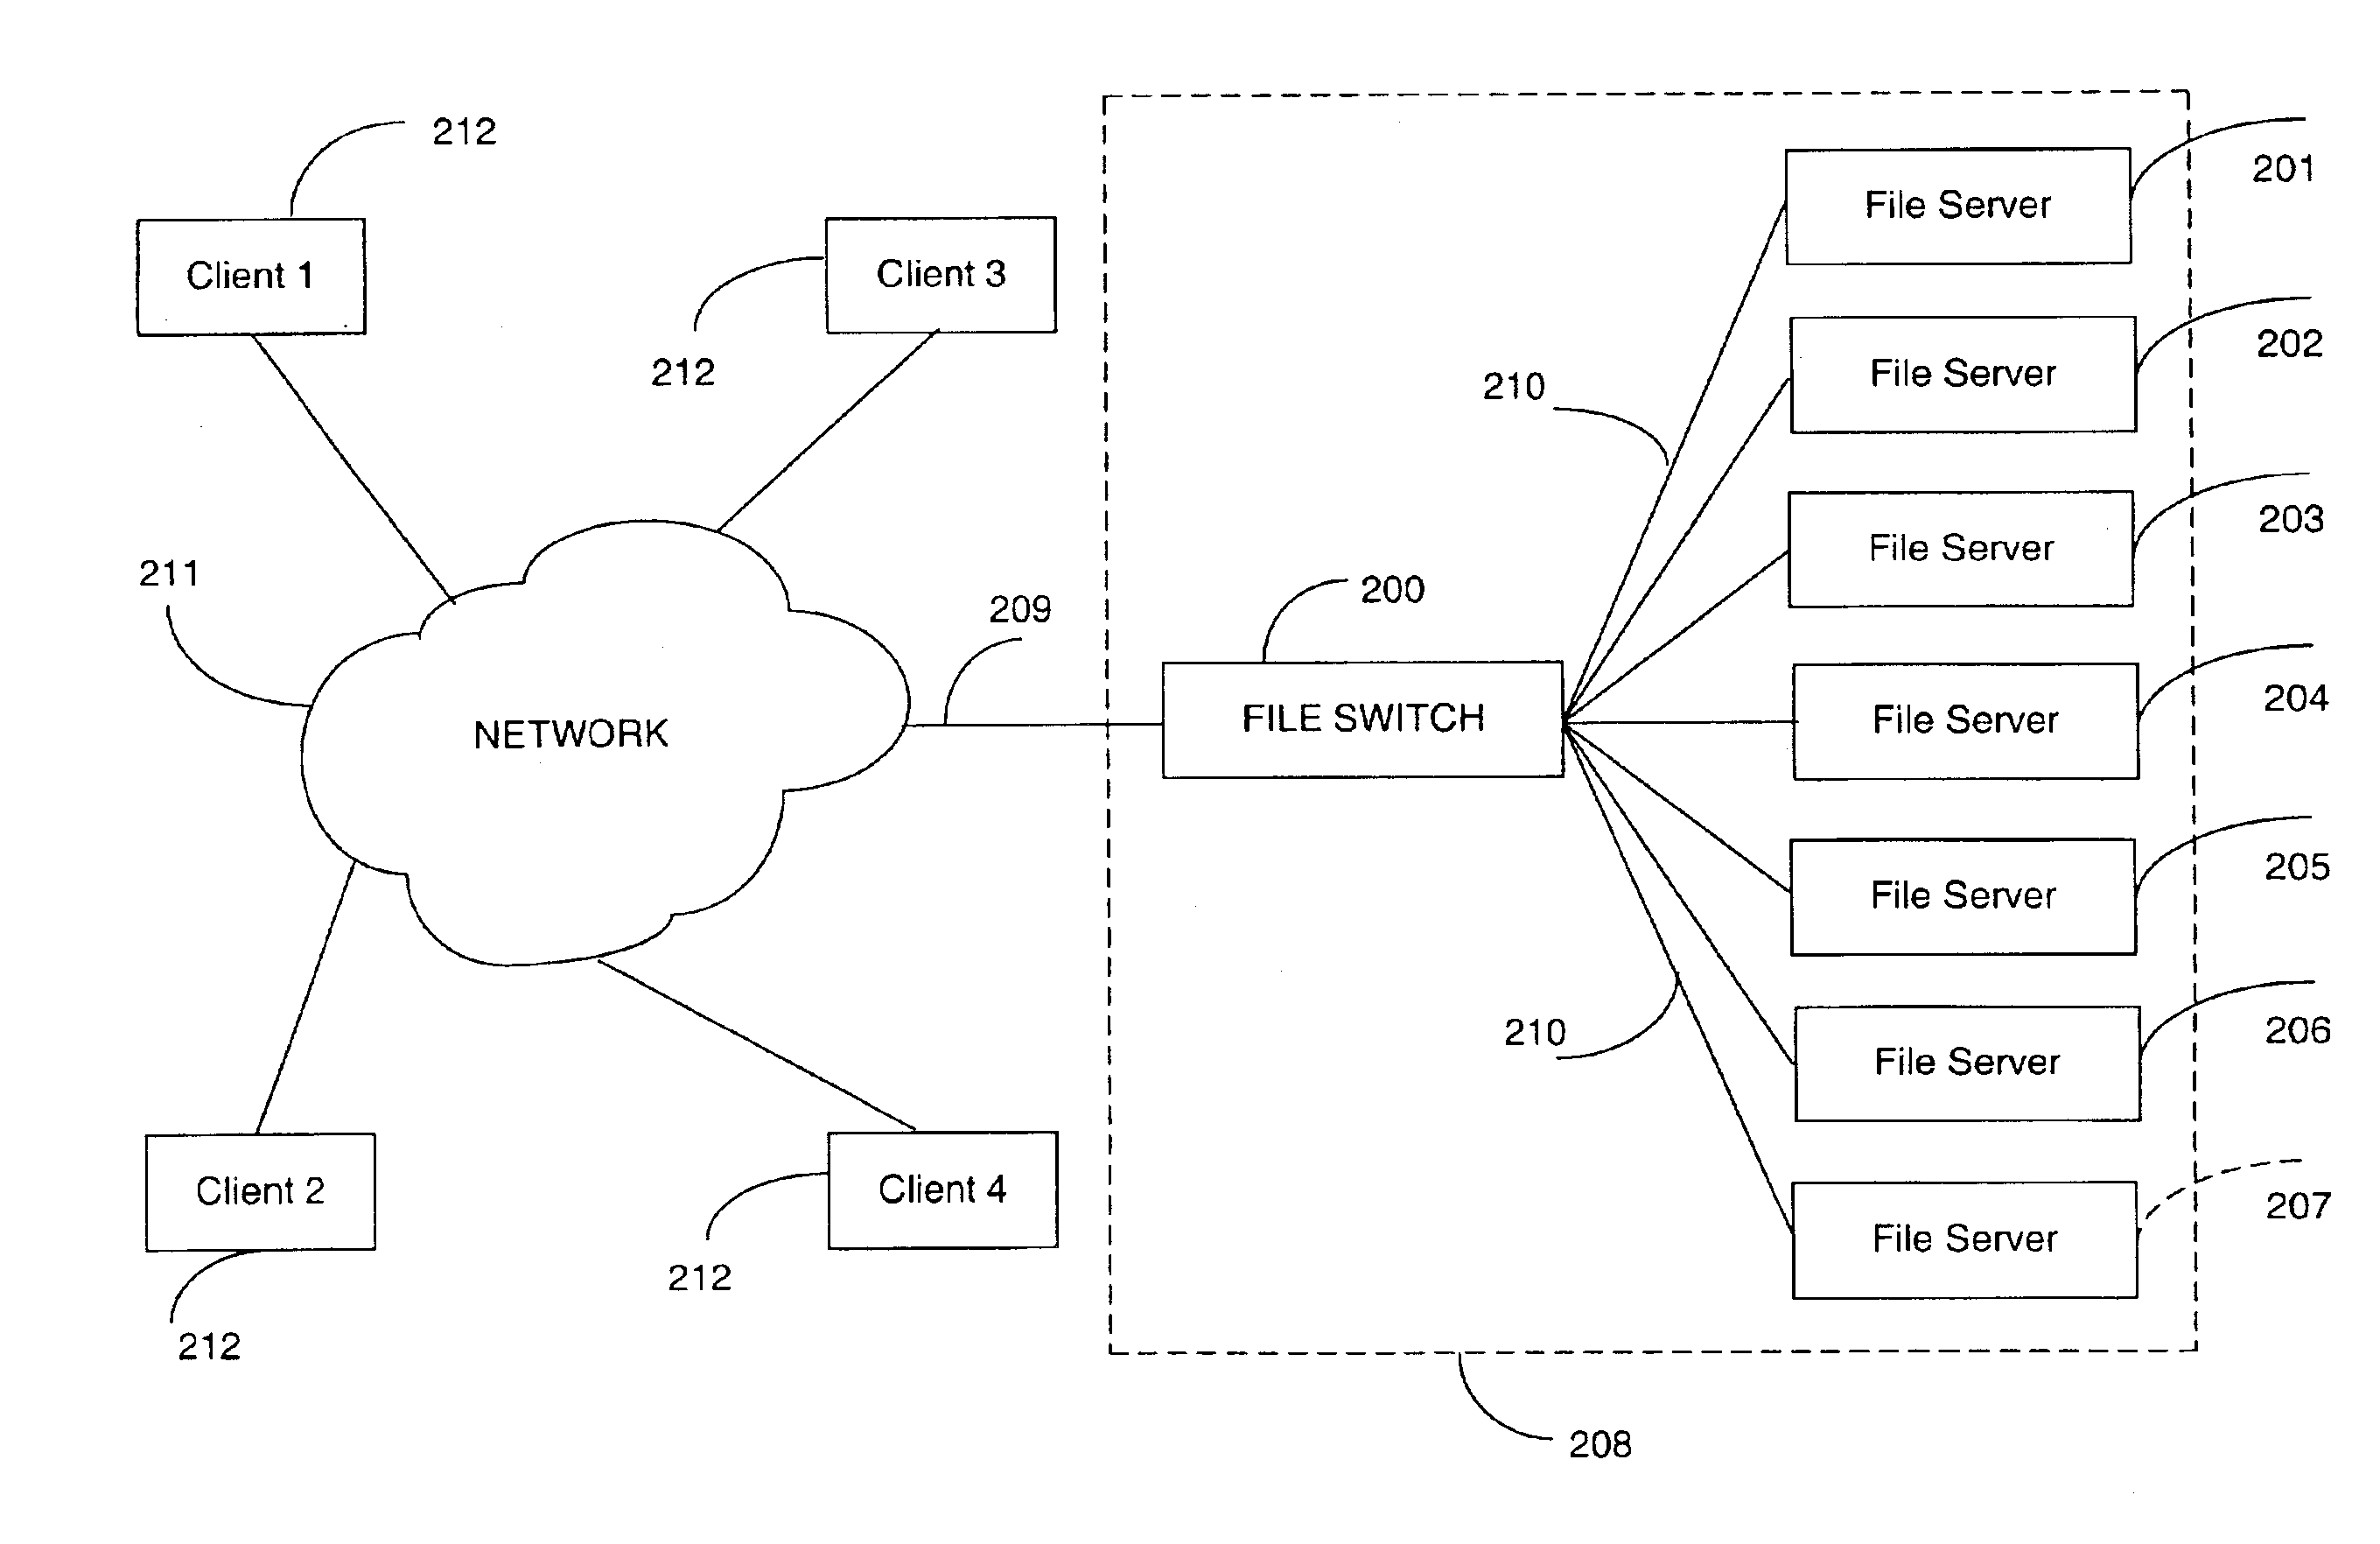 Transaction aggregation in a switched file system